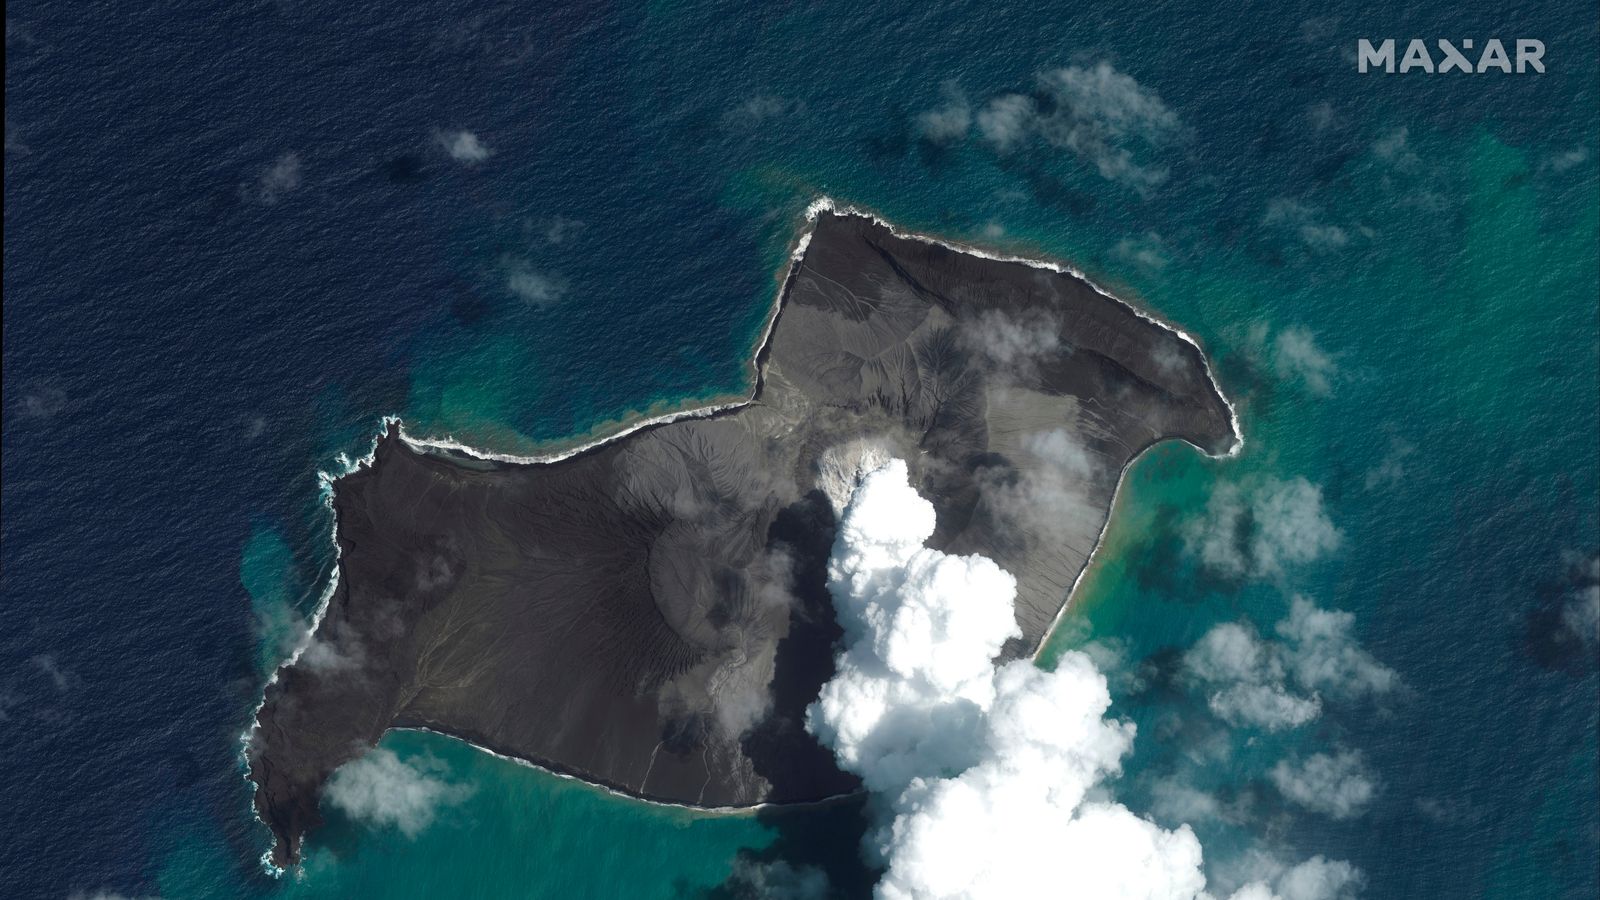 Tonga eruption Images show island covered in ash from HungaTonga